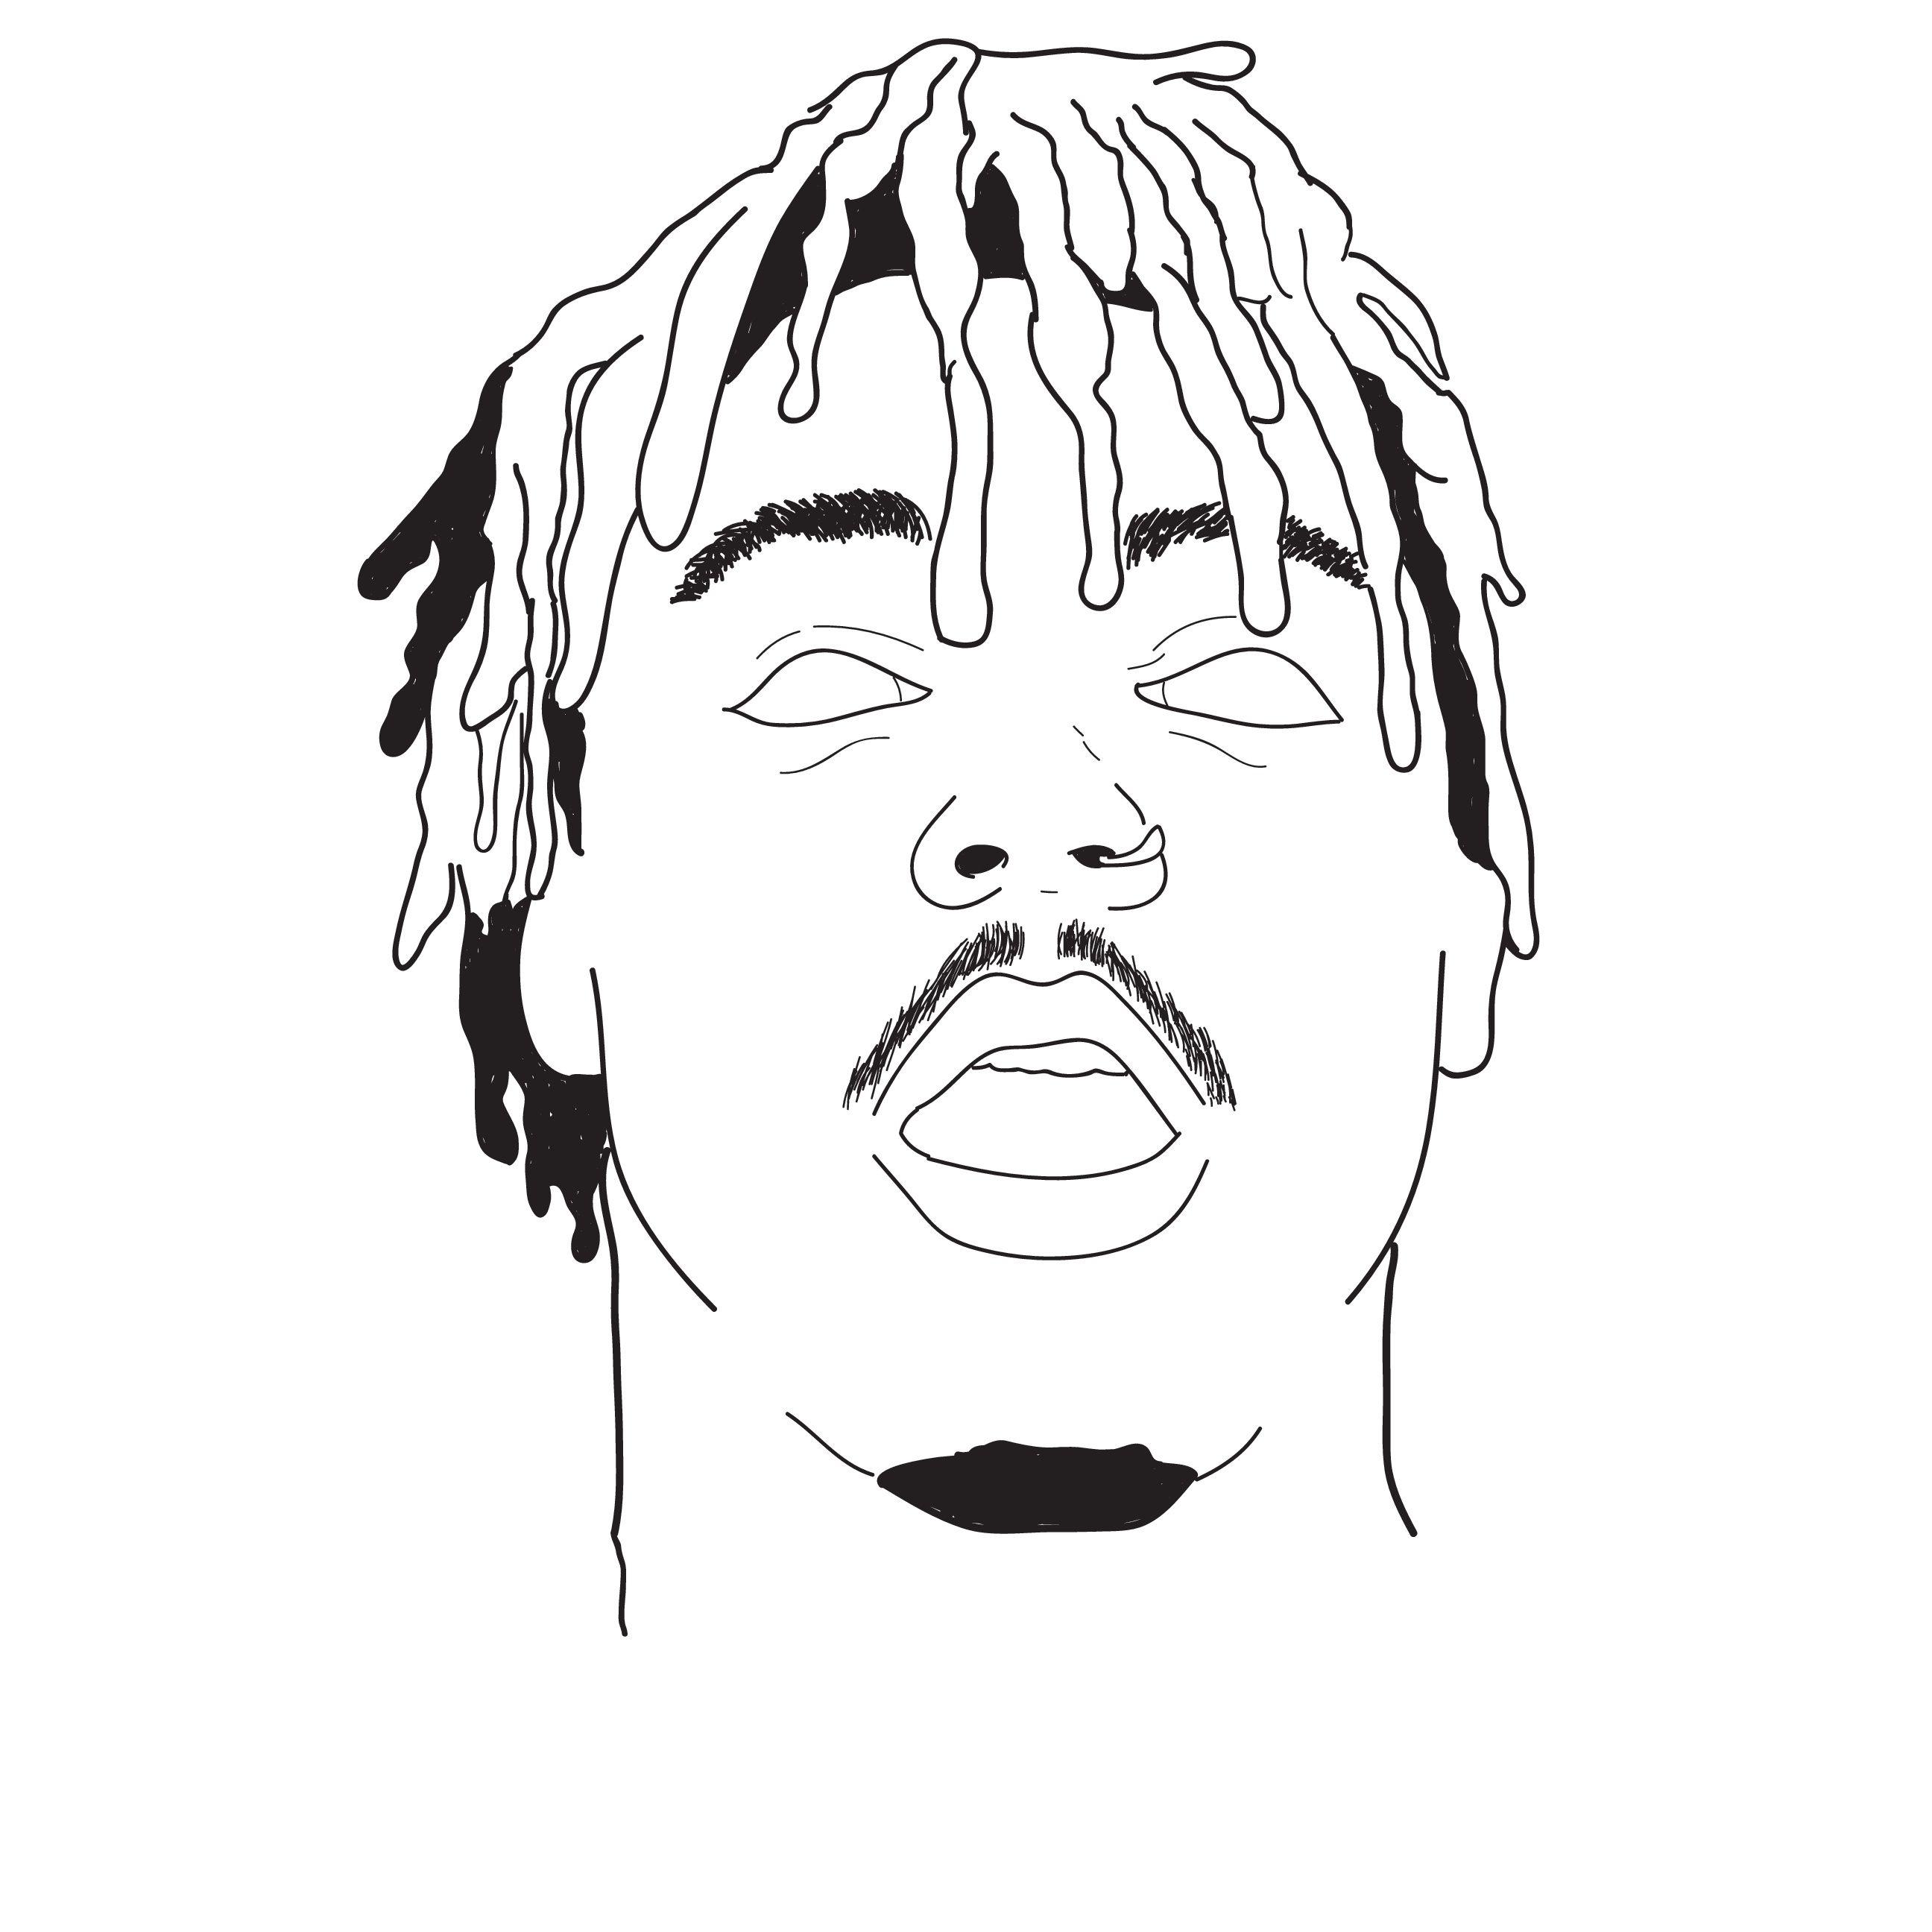 Xxxtentacion And Juice Wrld Anime Wallpapers Wallpaper Cave Draw an oval and divide it into 4 equal parts. xxxtentacion and juice wrld anime